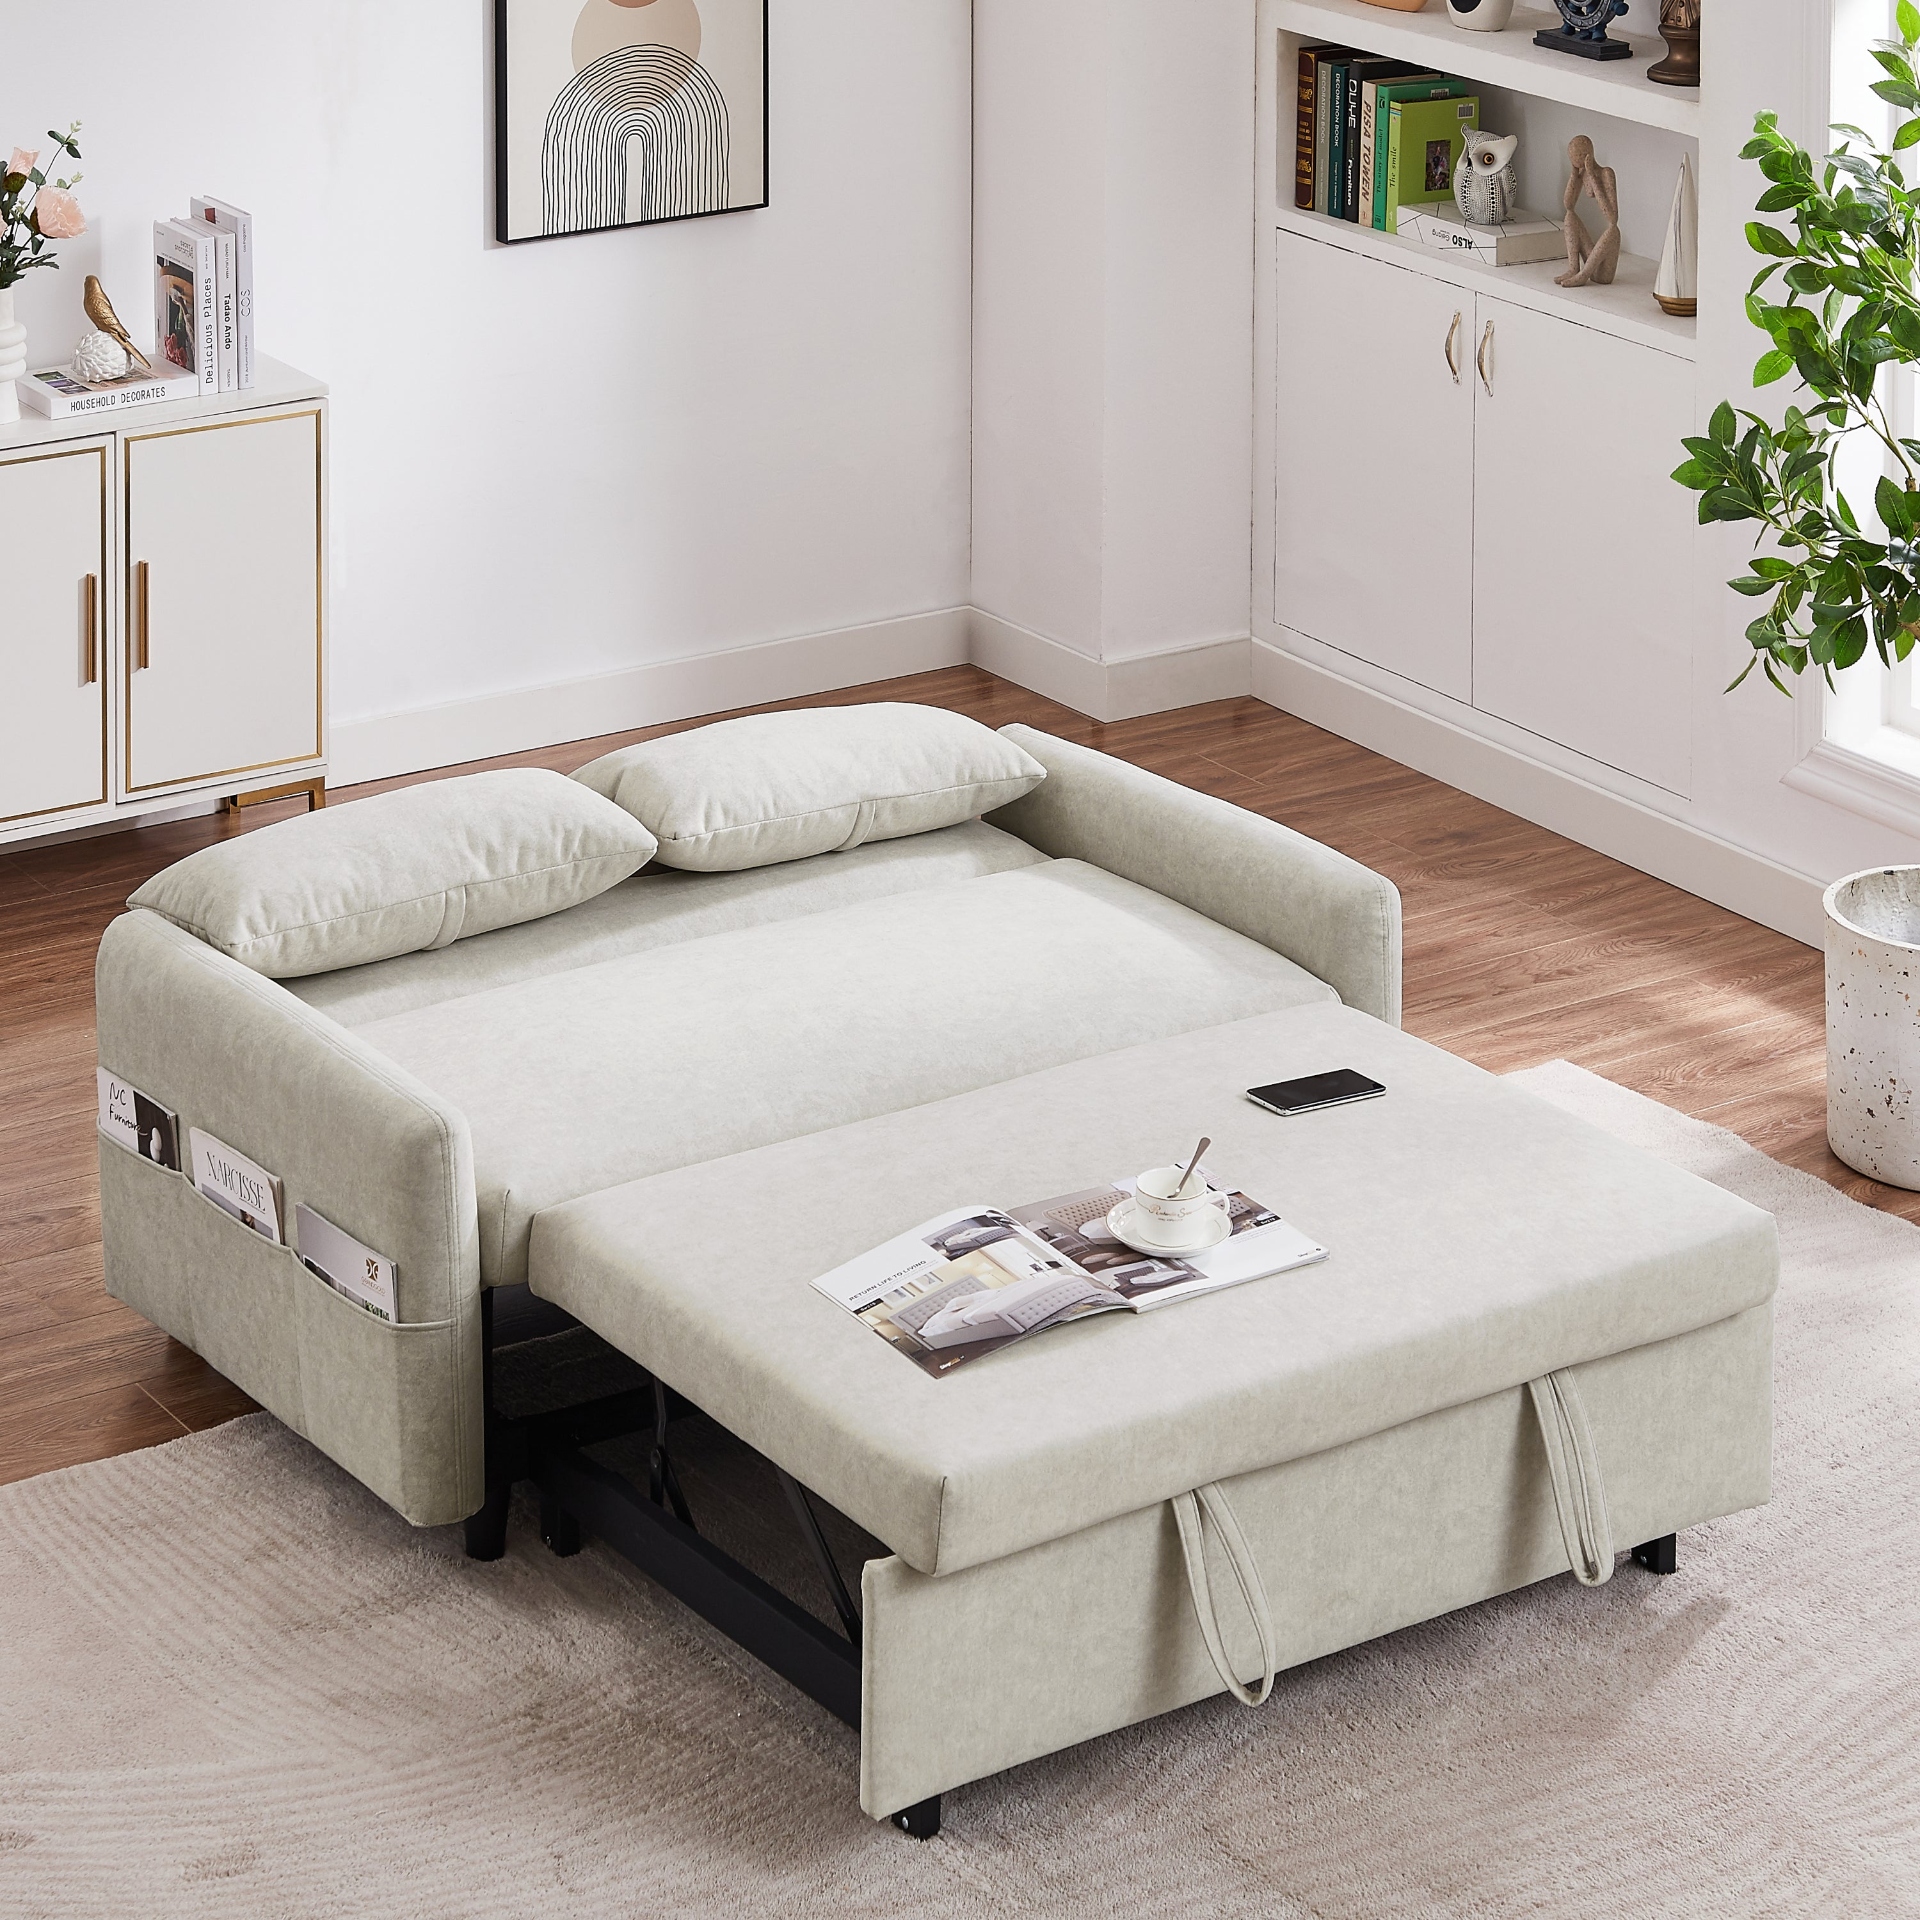 Beige - Urban Chic Loveseat Style Sofa Bed with Adjustable Backrest and USB Ports (55")